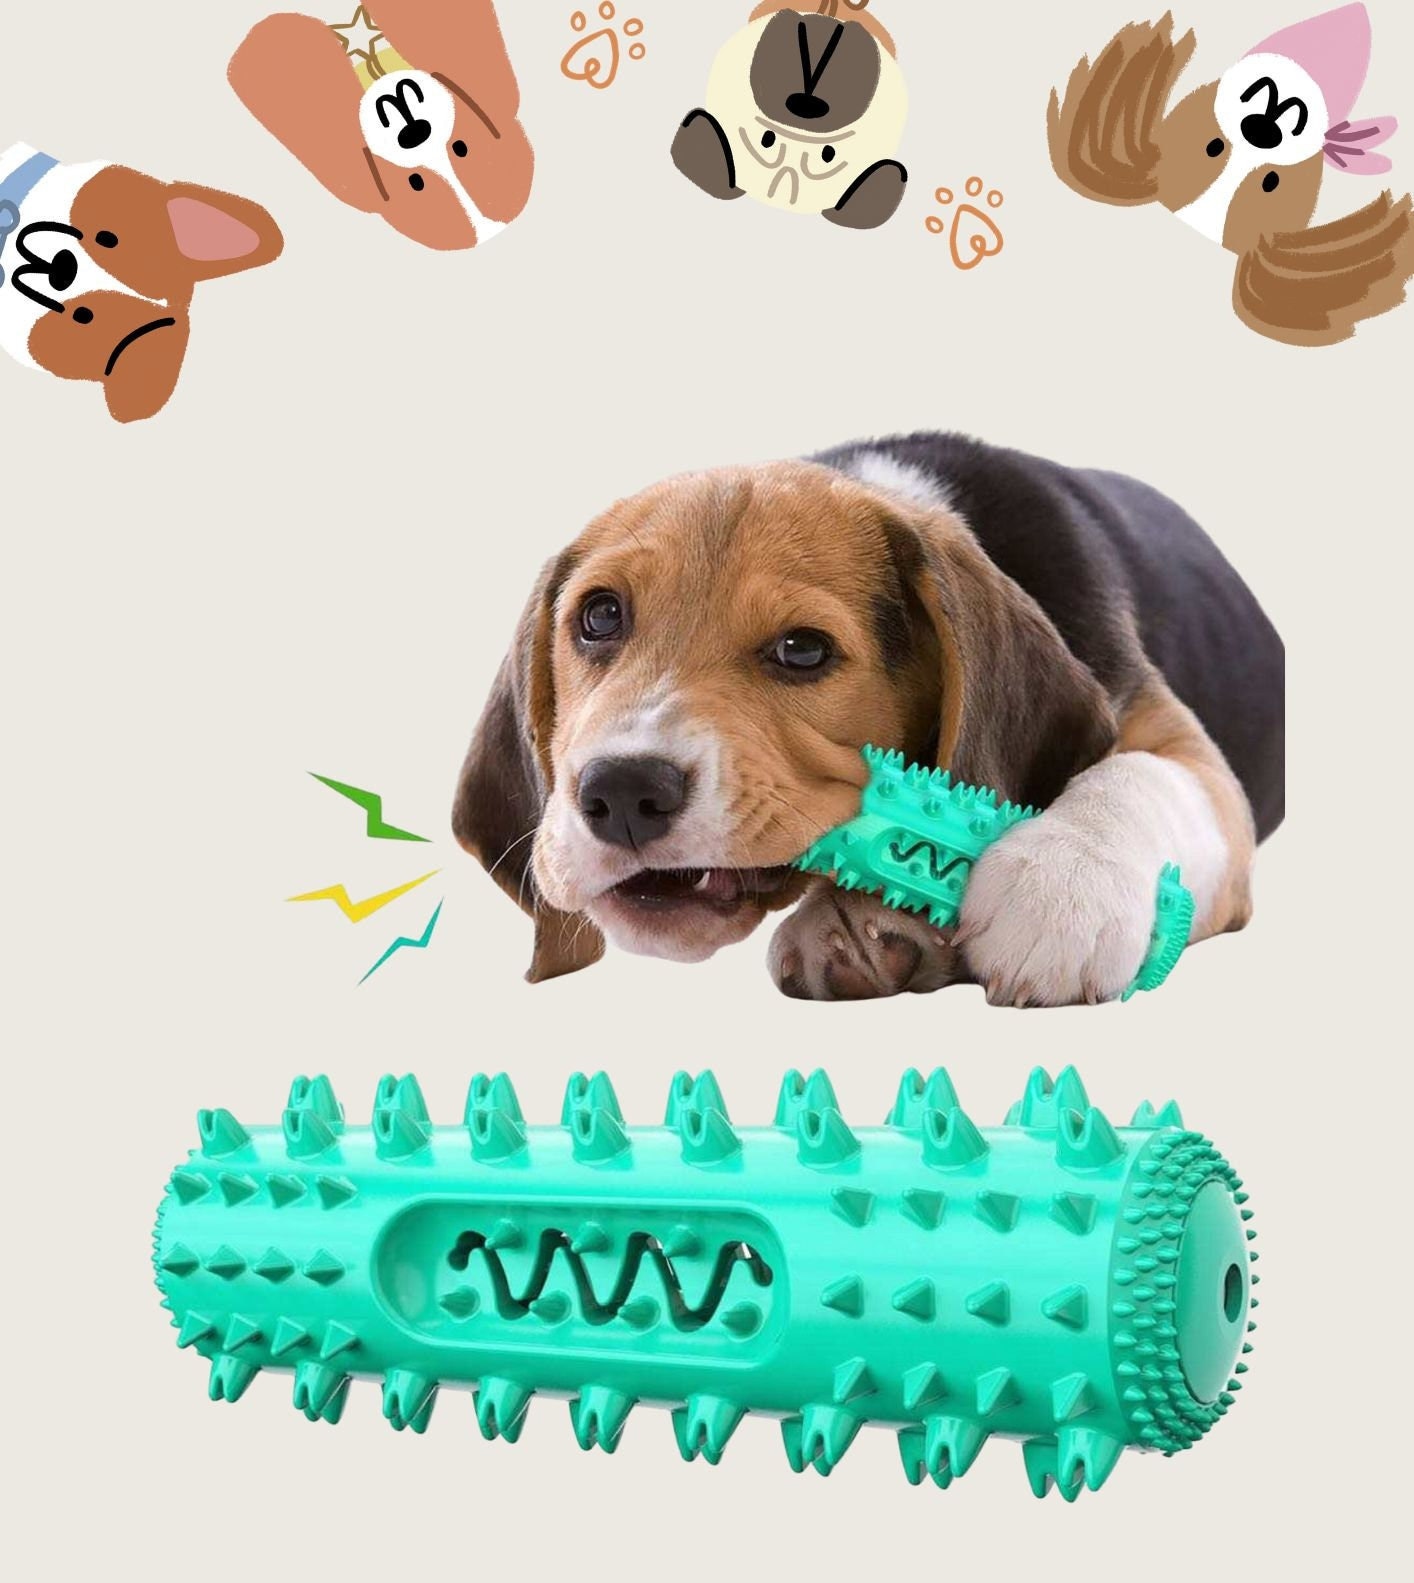 1pc Pet Toy Plush Rope Dog Toy Resistant To Bite, Relieves Anxiety, For  Training And Biting